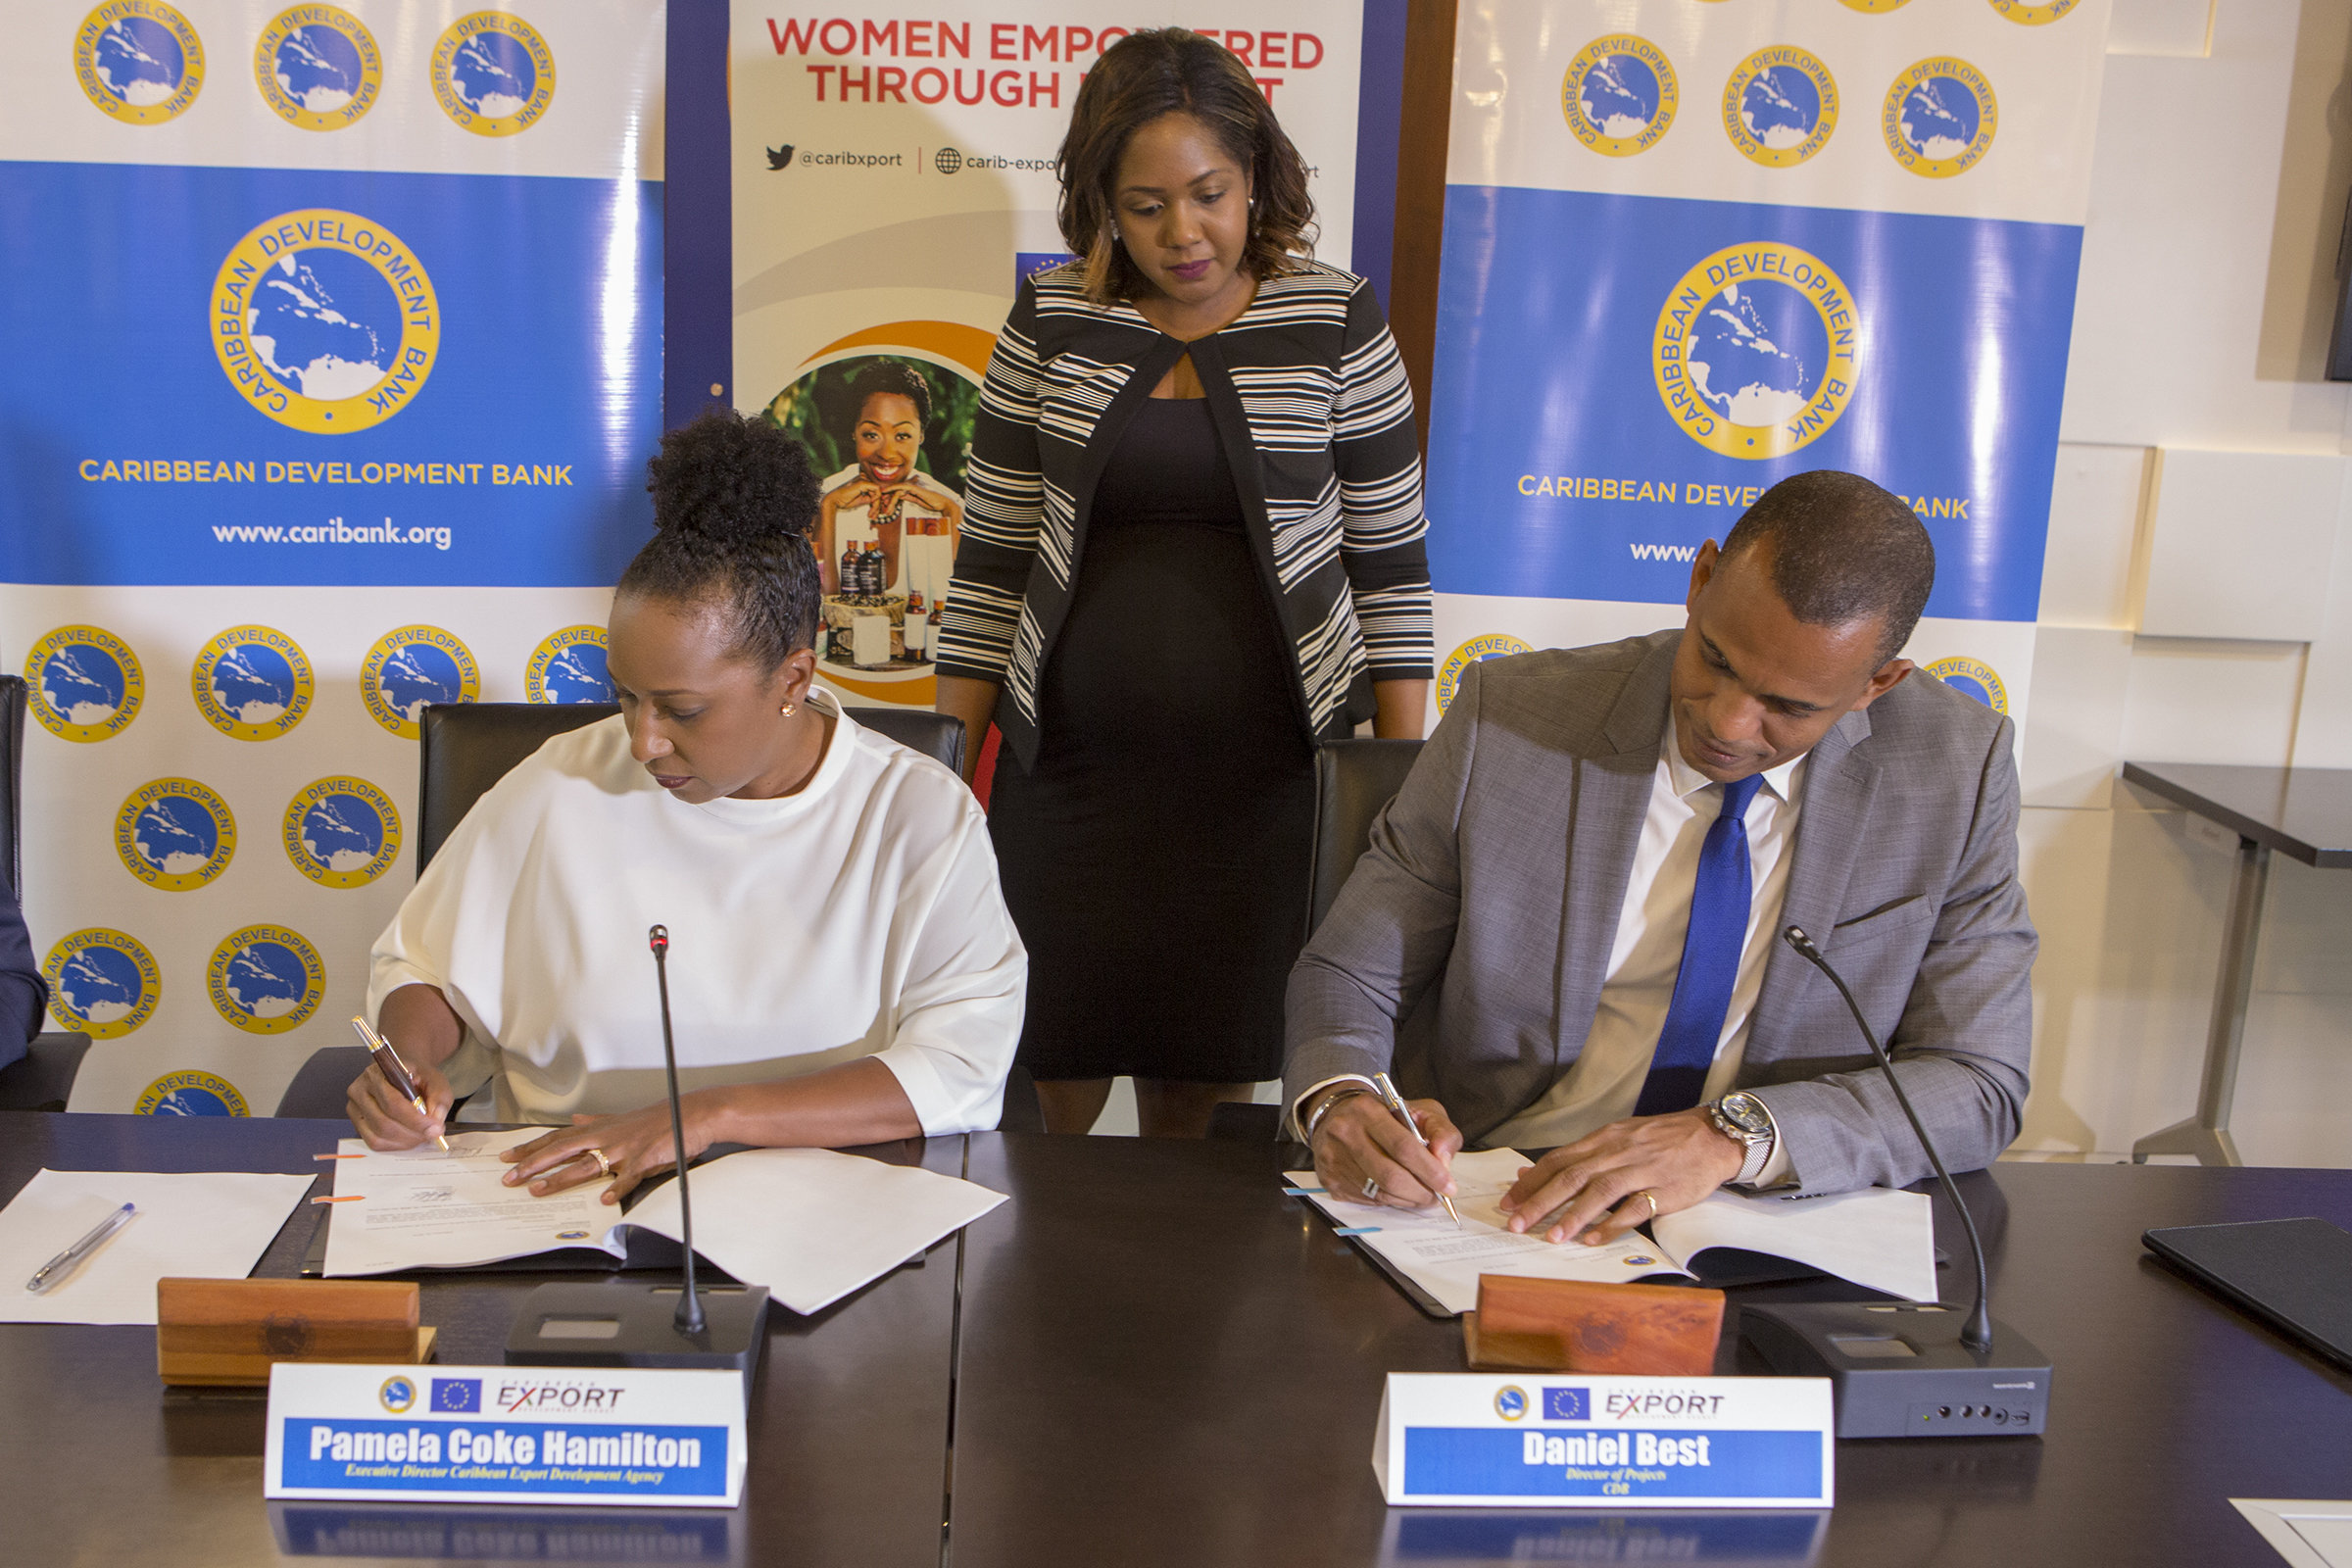 Pamela Coke Hamilton, Executive Director, Caribbean Export (left) and Daniel Best, Director of Projects, CDB (right) sign the WE-Xport Agreement, while Alana Goodman-Smith, Legal Counsel, CDB (standing) observes.